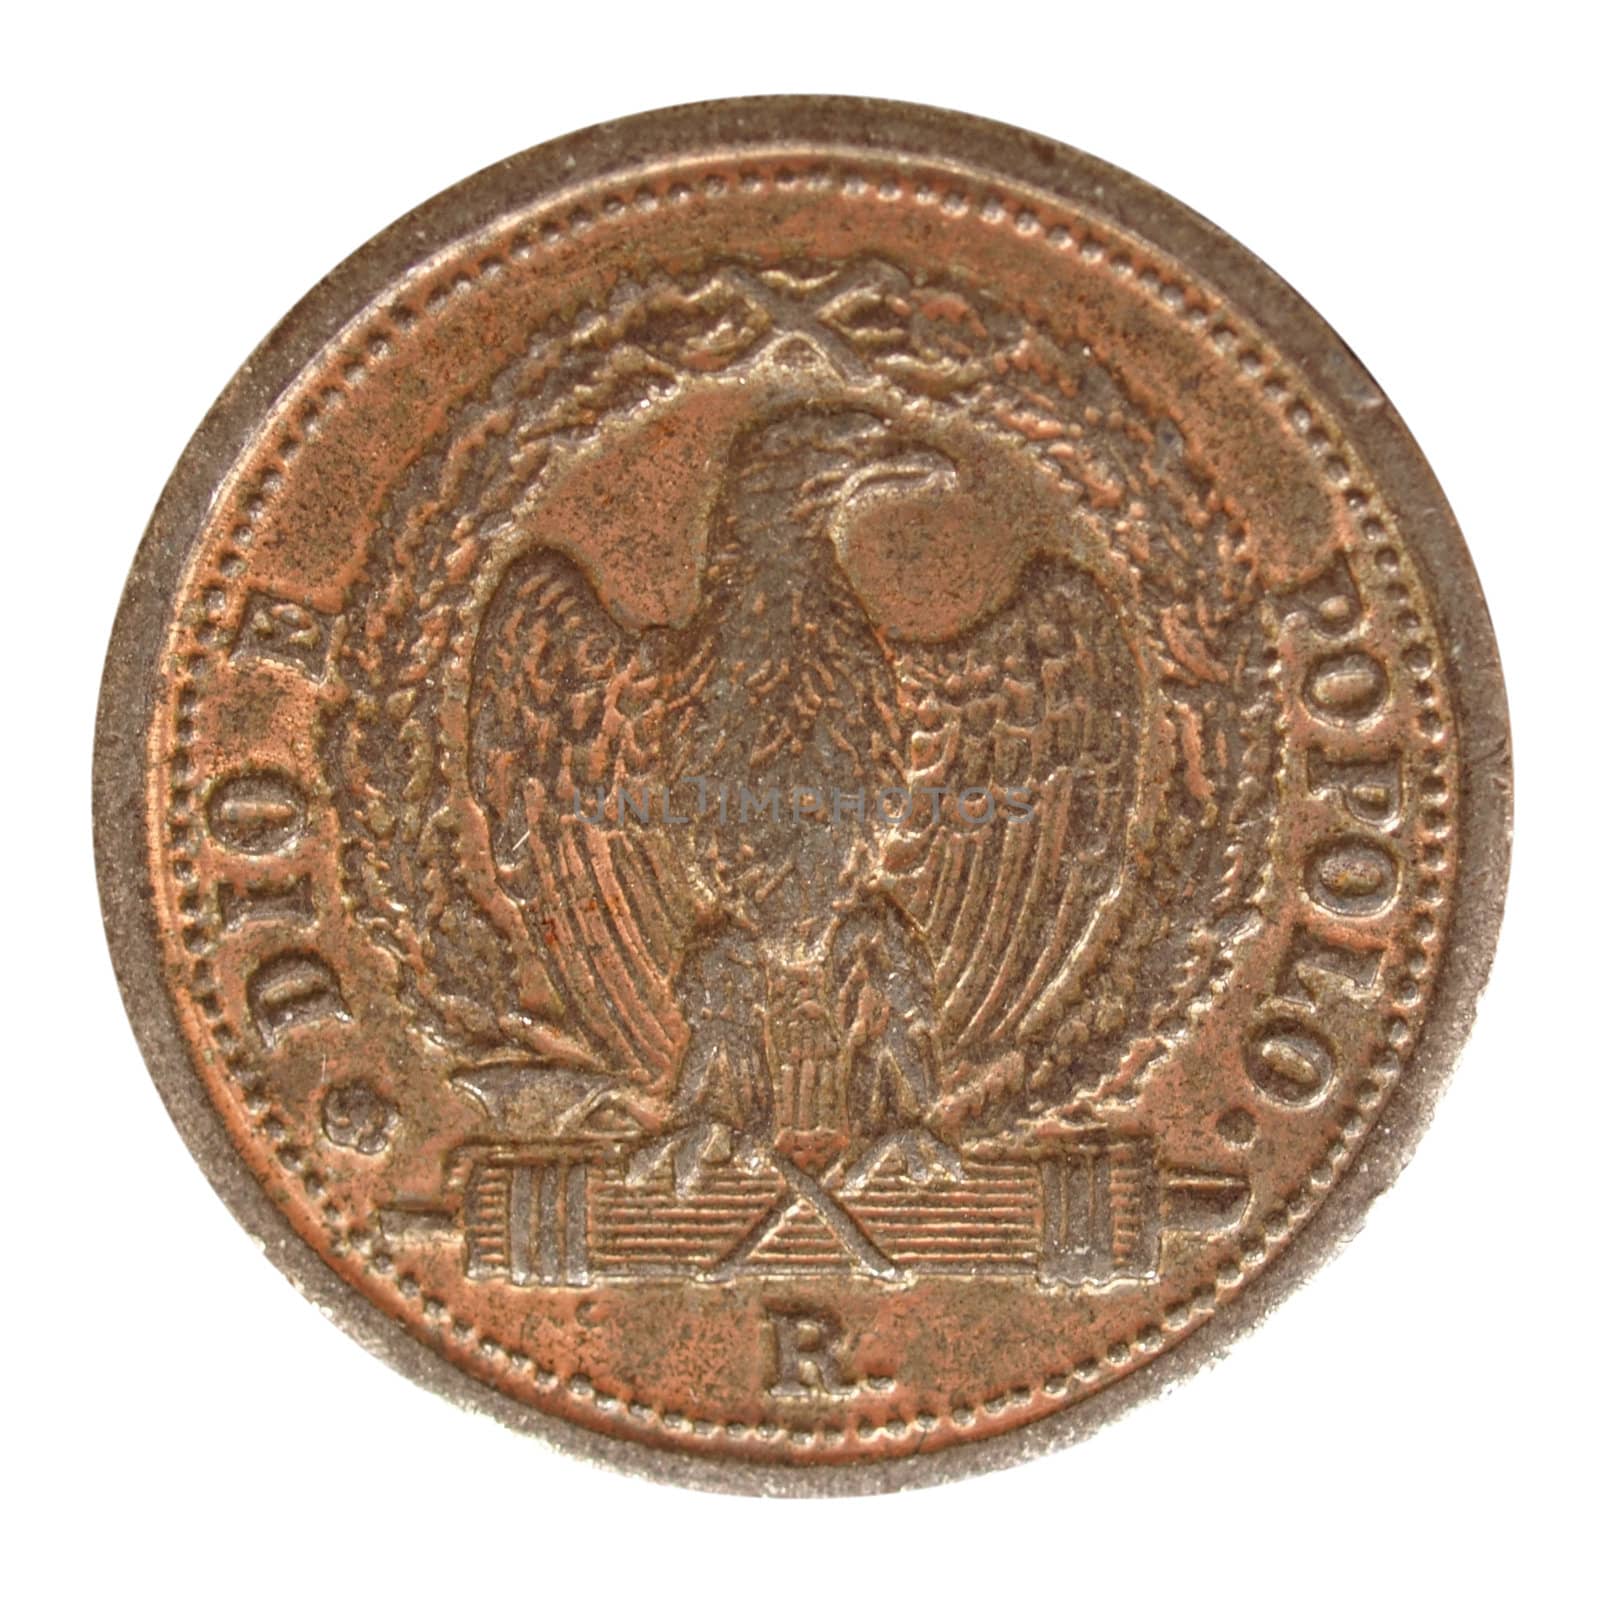 Close up of a vintage Italian coin